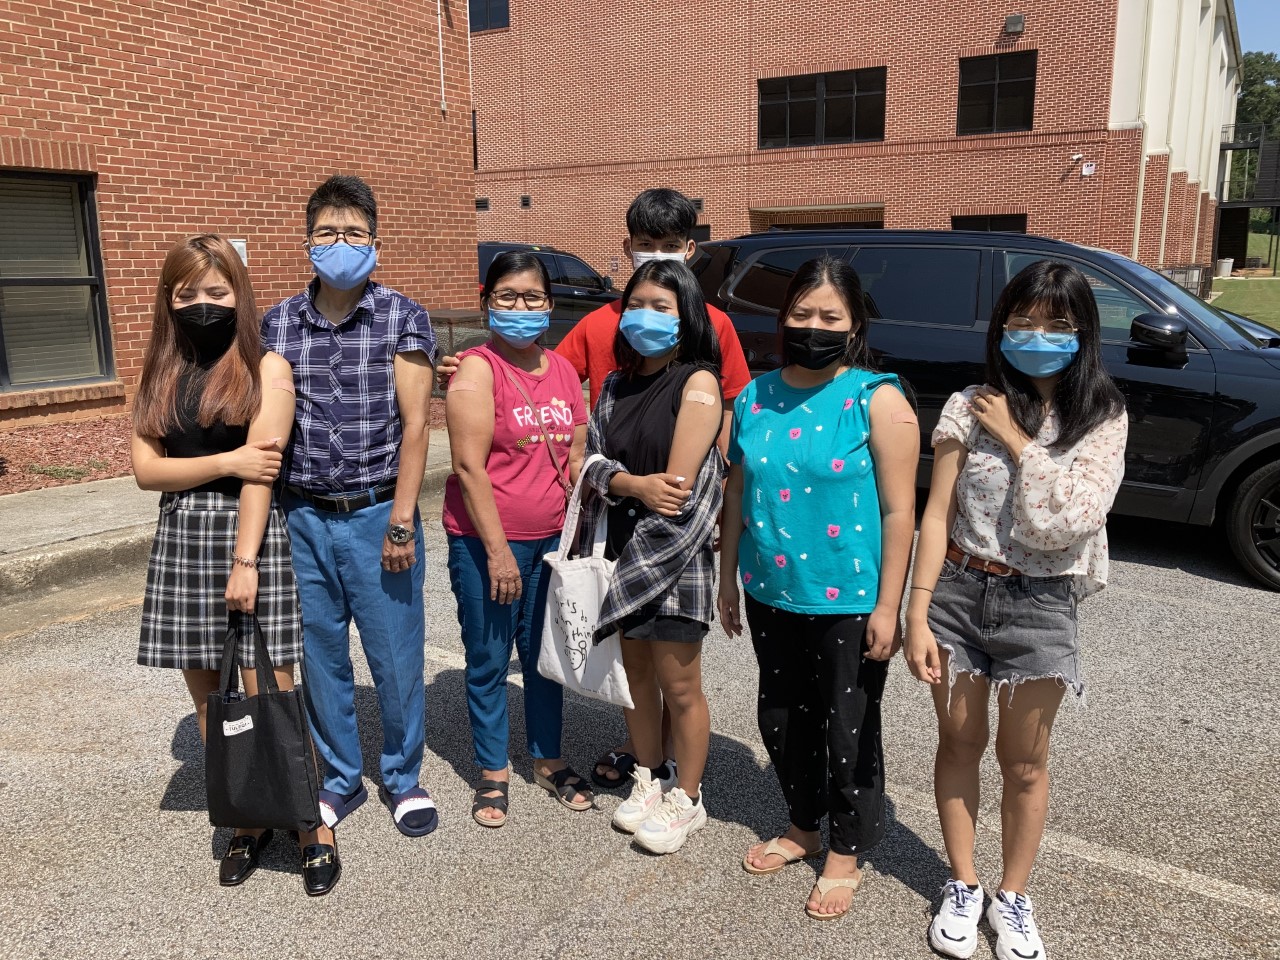 A family wearing masks poses together and shows off vaccination bandages